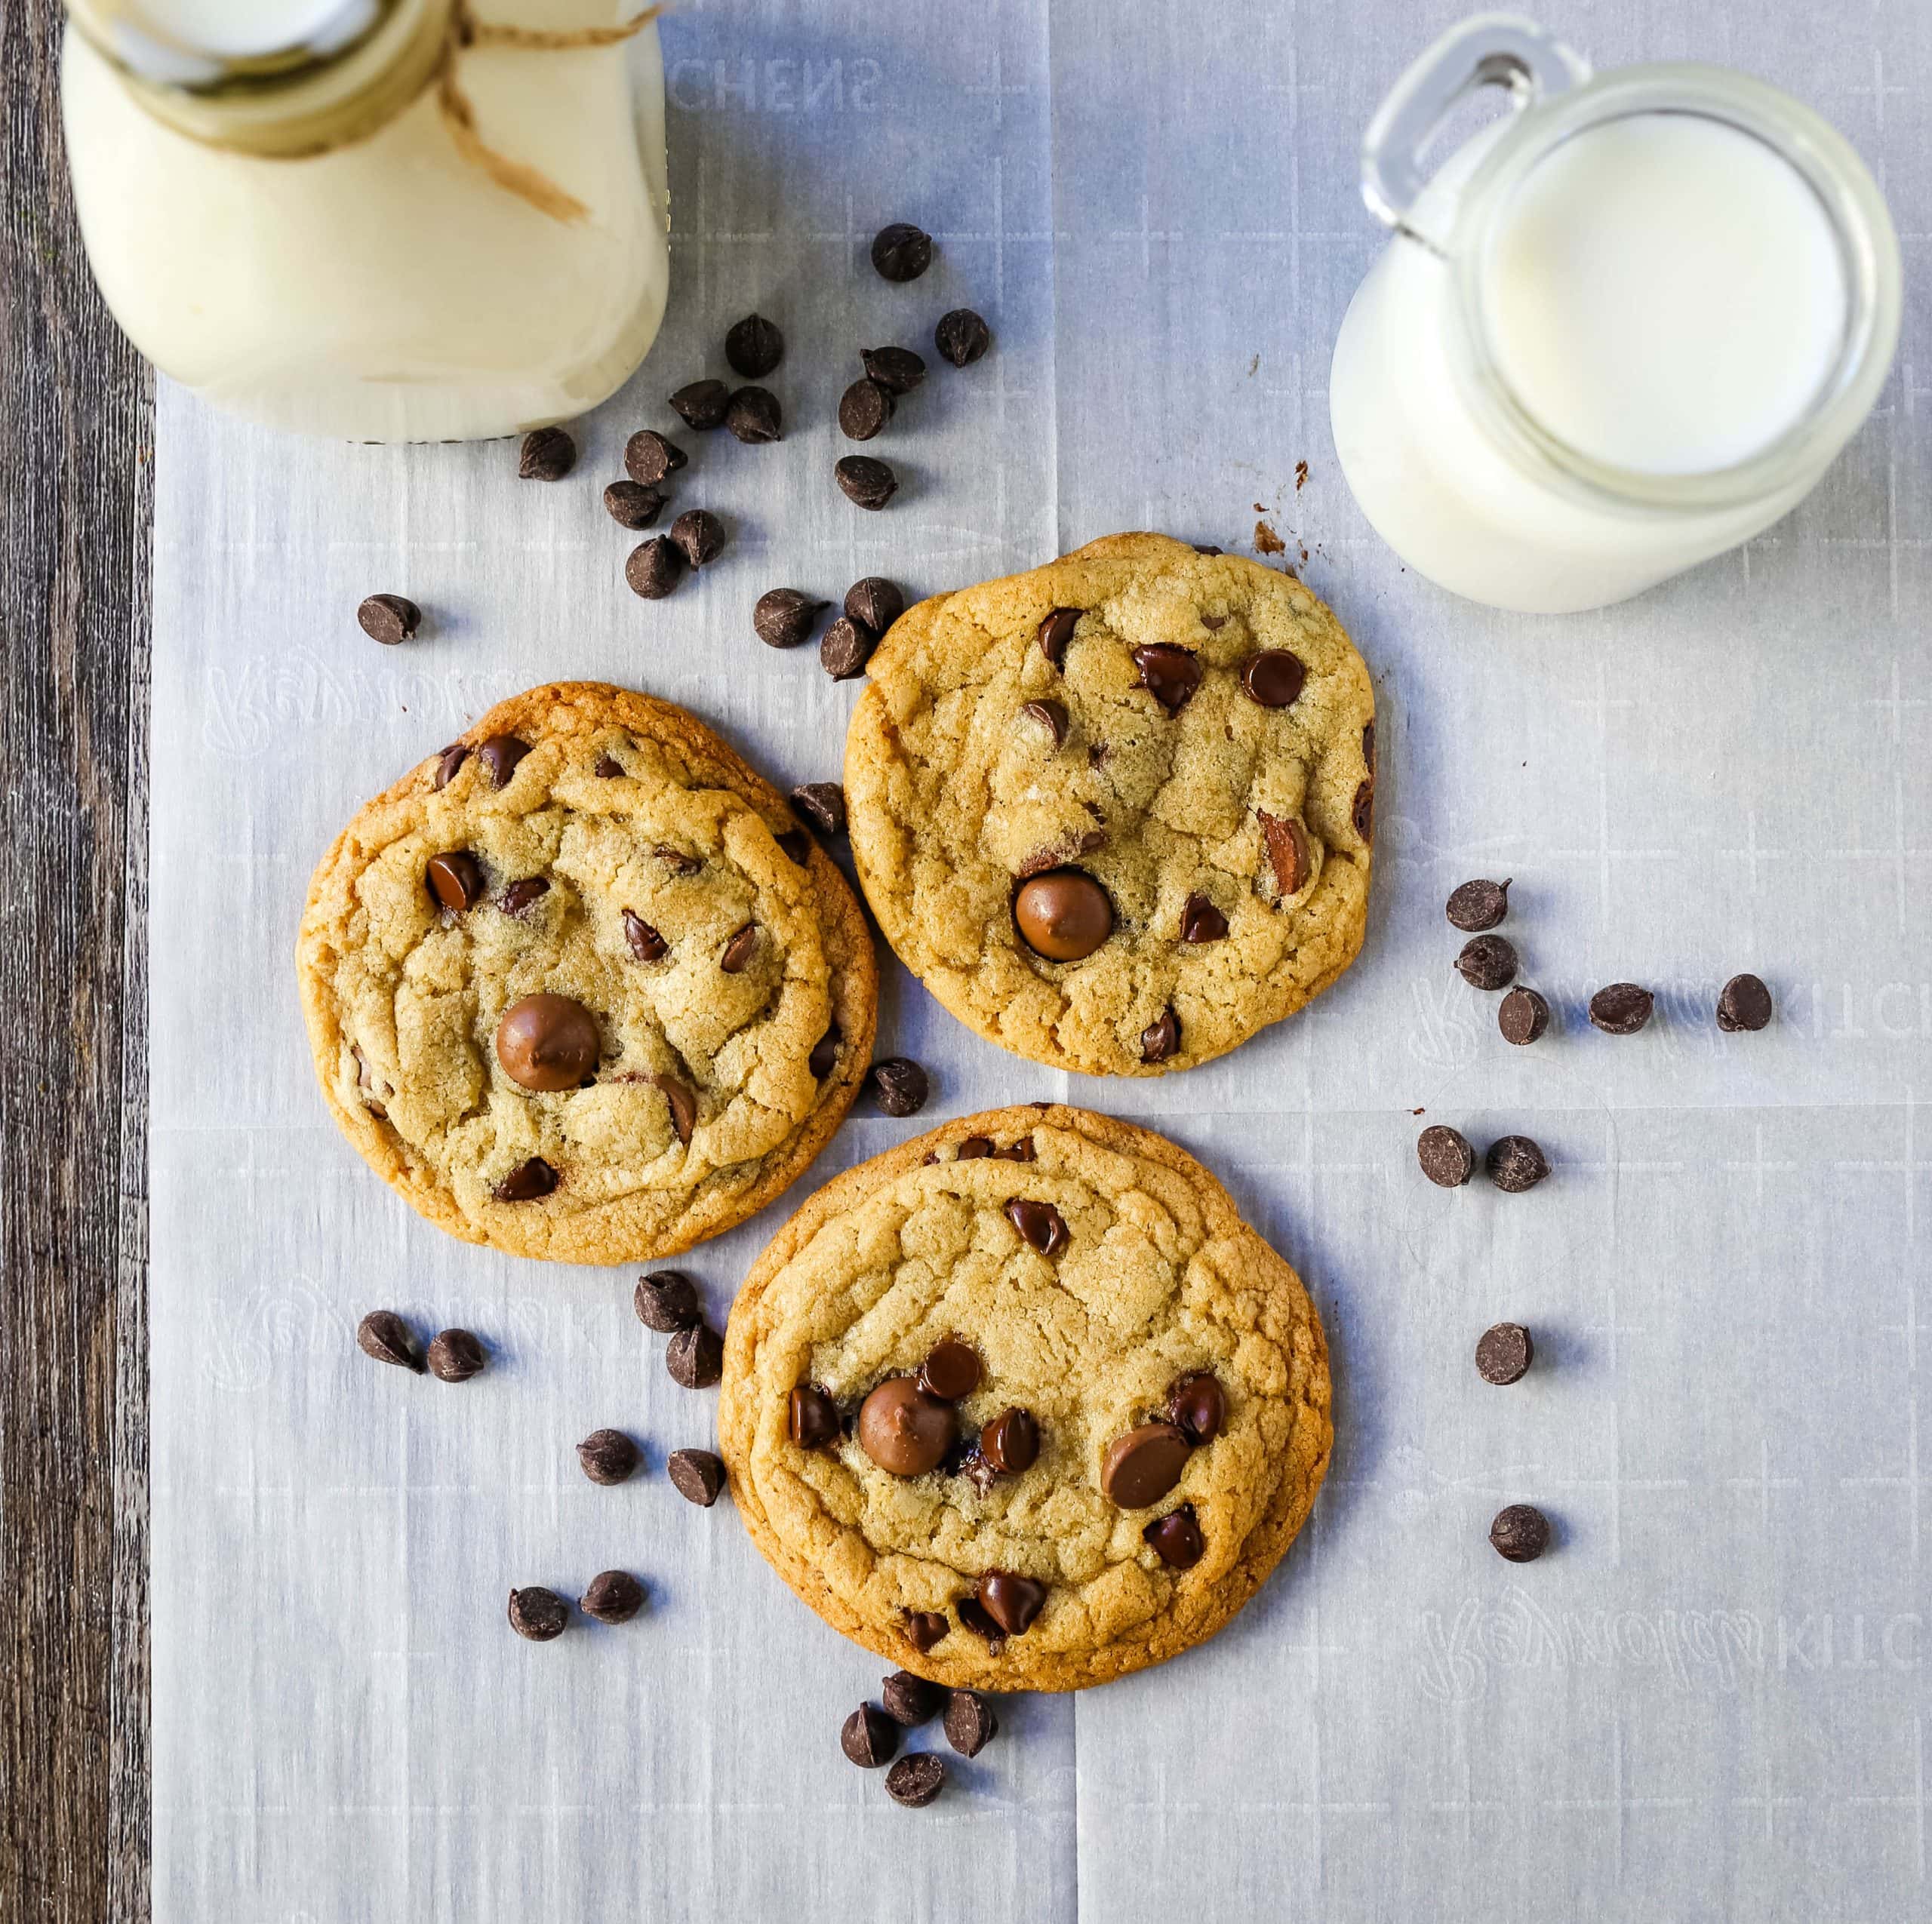 ONE BOWL CHOCOLATE CHIP COOKIE RECIPE An easy one bowl cookie recipe that creates a chewy chocolate chip cookie with crisp buttery edges.  www.modernhoney.com #cookie #cookies #chocolatechipcookie #chocolatechipcookies